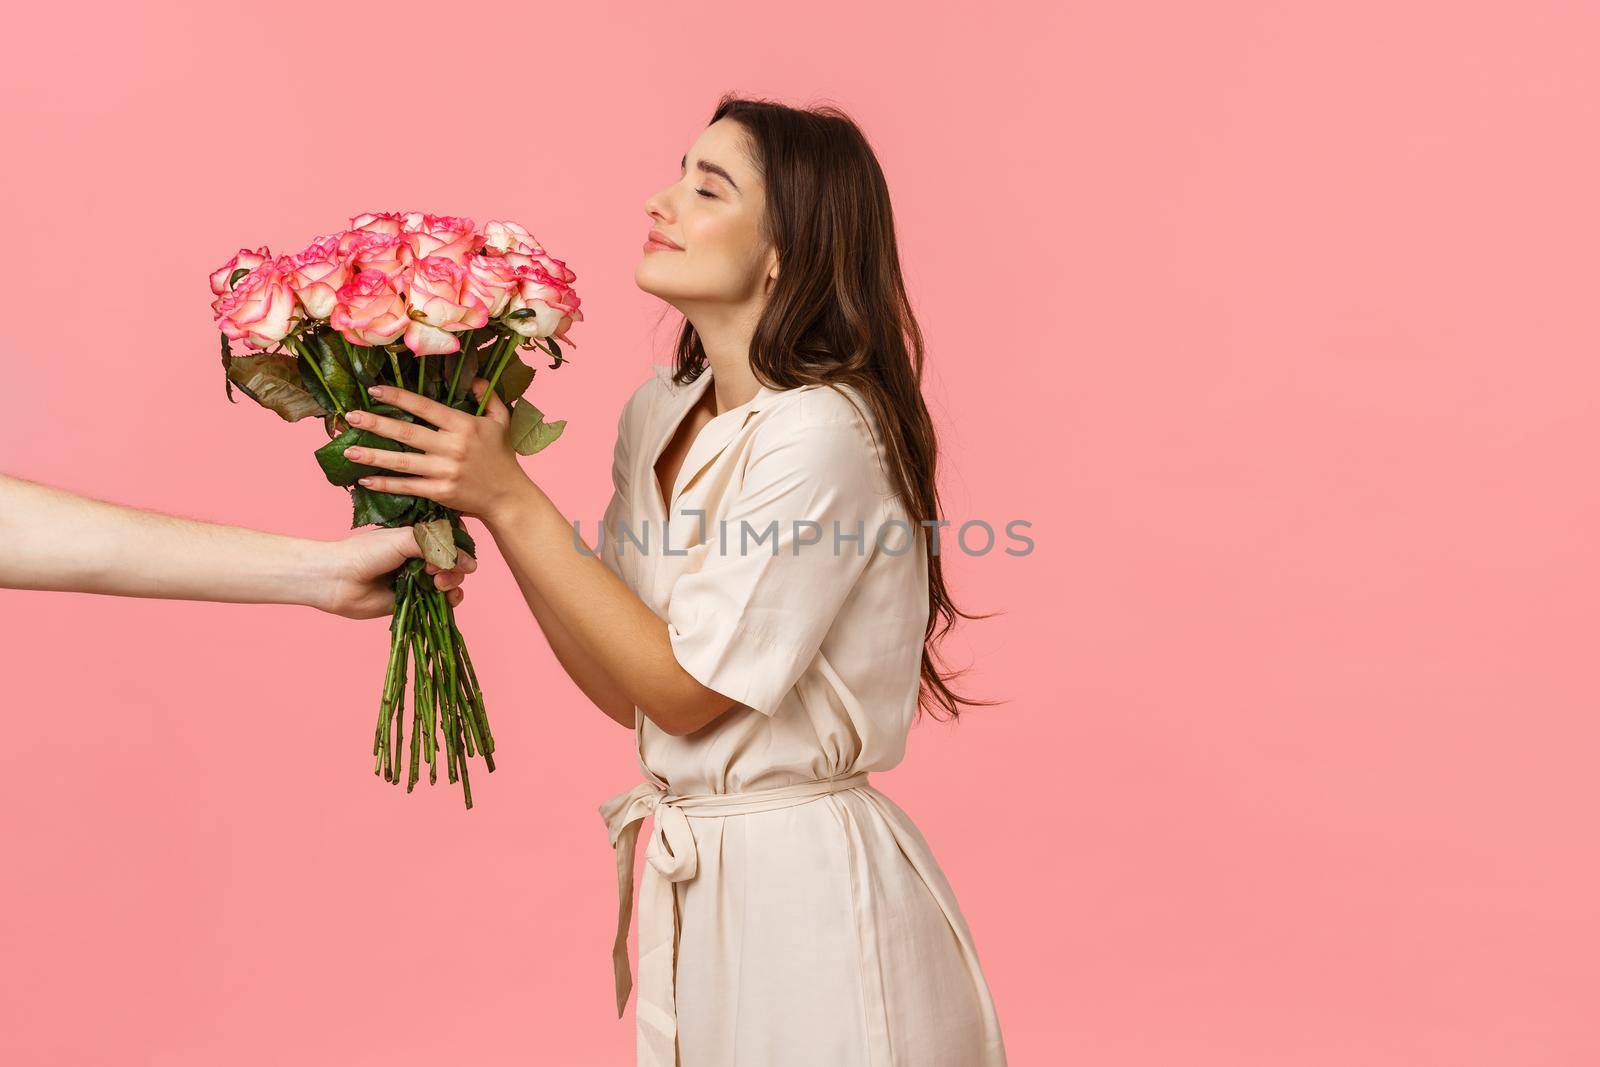 Romance, valentines day and happiness concept. Gorgeous young woman receiving delivery, smelling pretty roses as hand extending bouquet to girl, smiling delighted, got surprise gift, pink background.